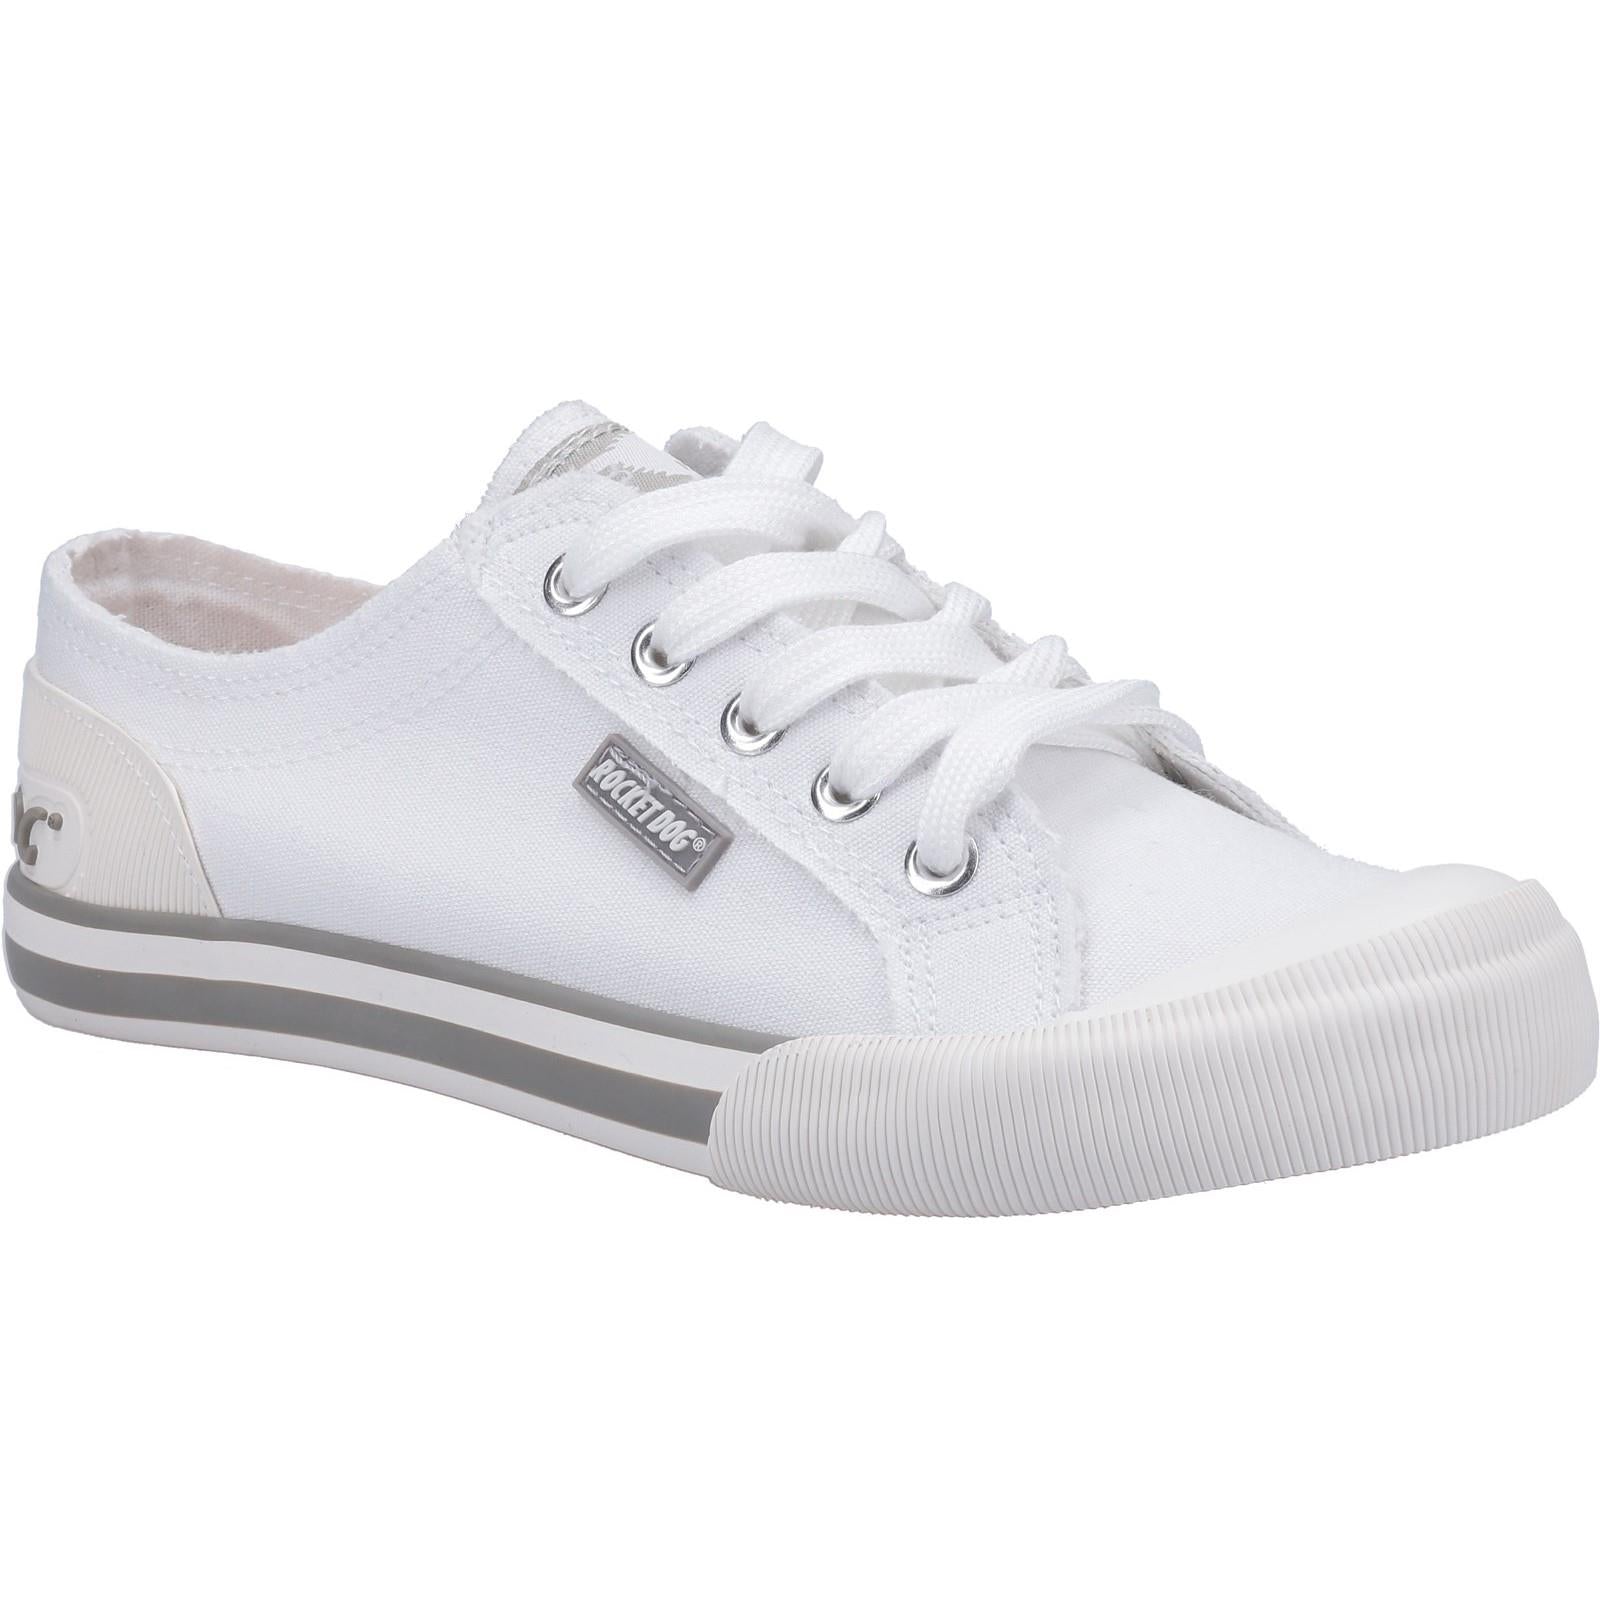 Rocket Dog Jazzin Canvas ladies white lace up plimsoll trainers shoes